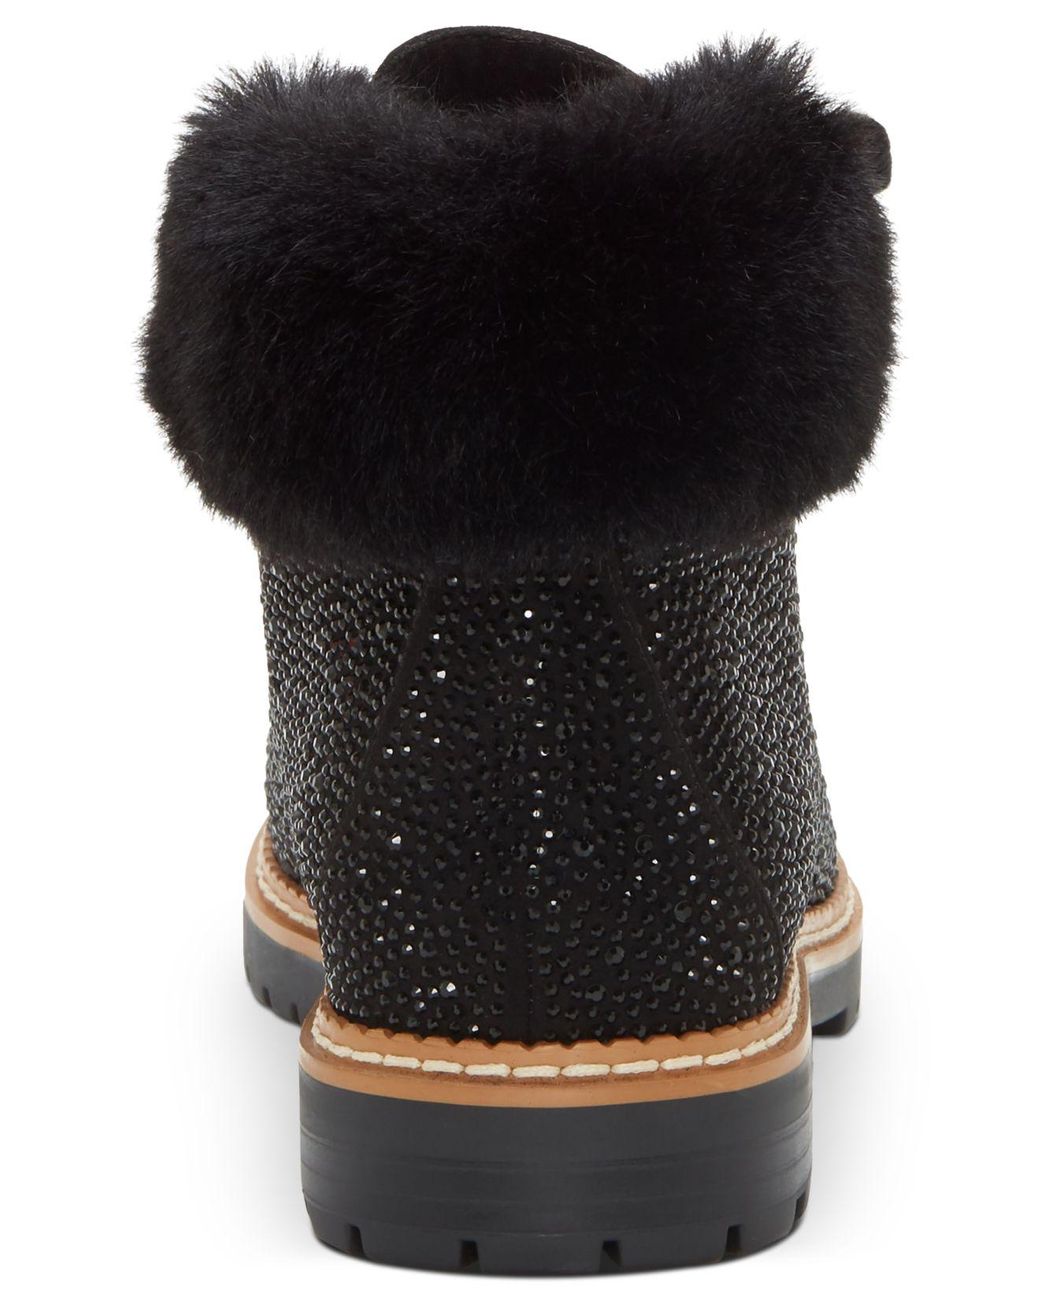 blinged out booties